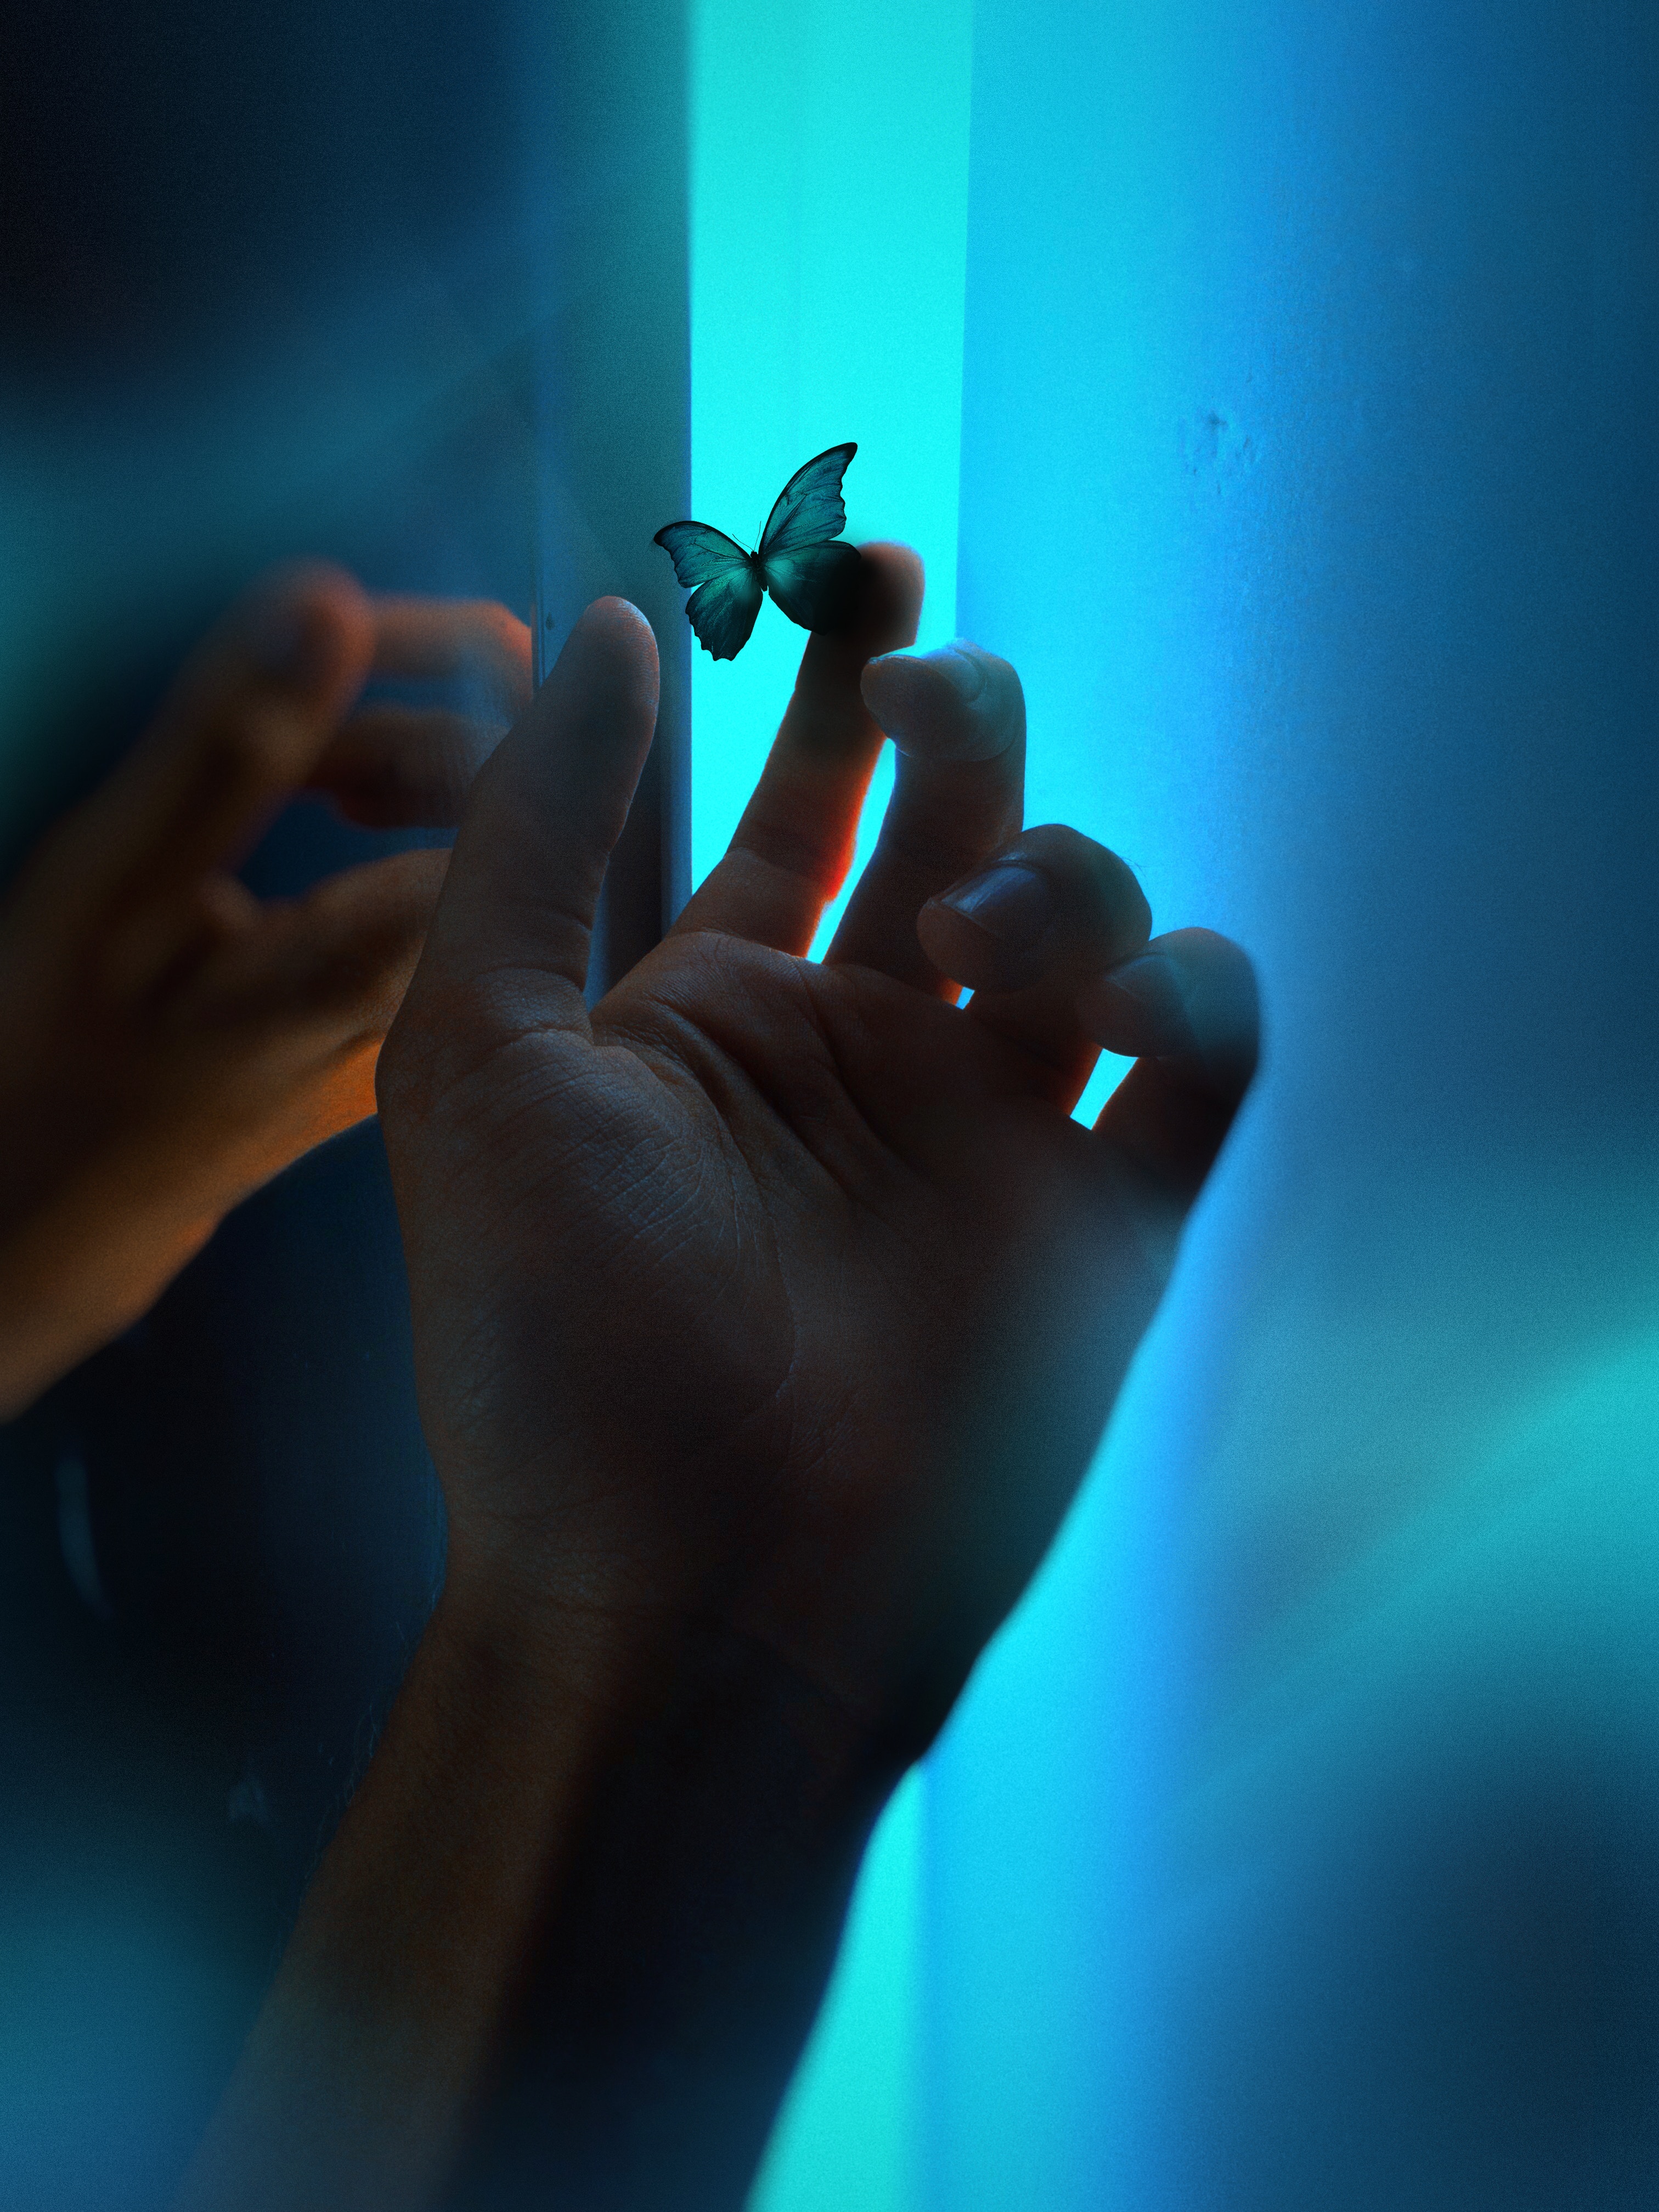 HD wallpaper persons hand with black background palm light hand in hand   Wallpaper Flare